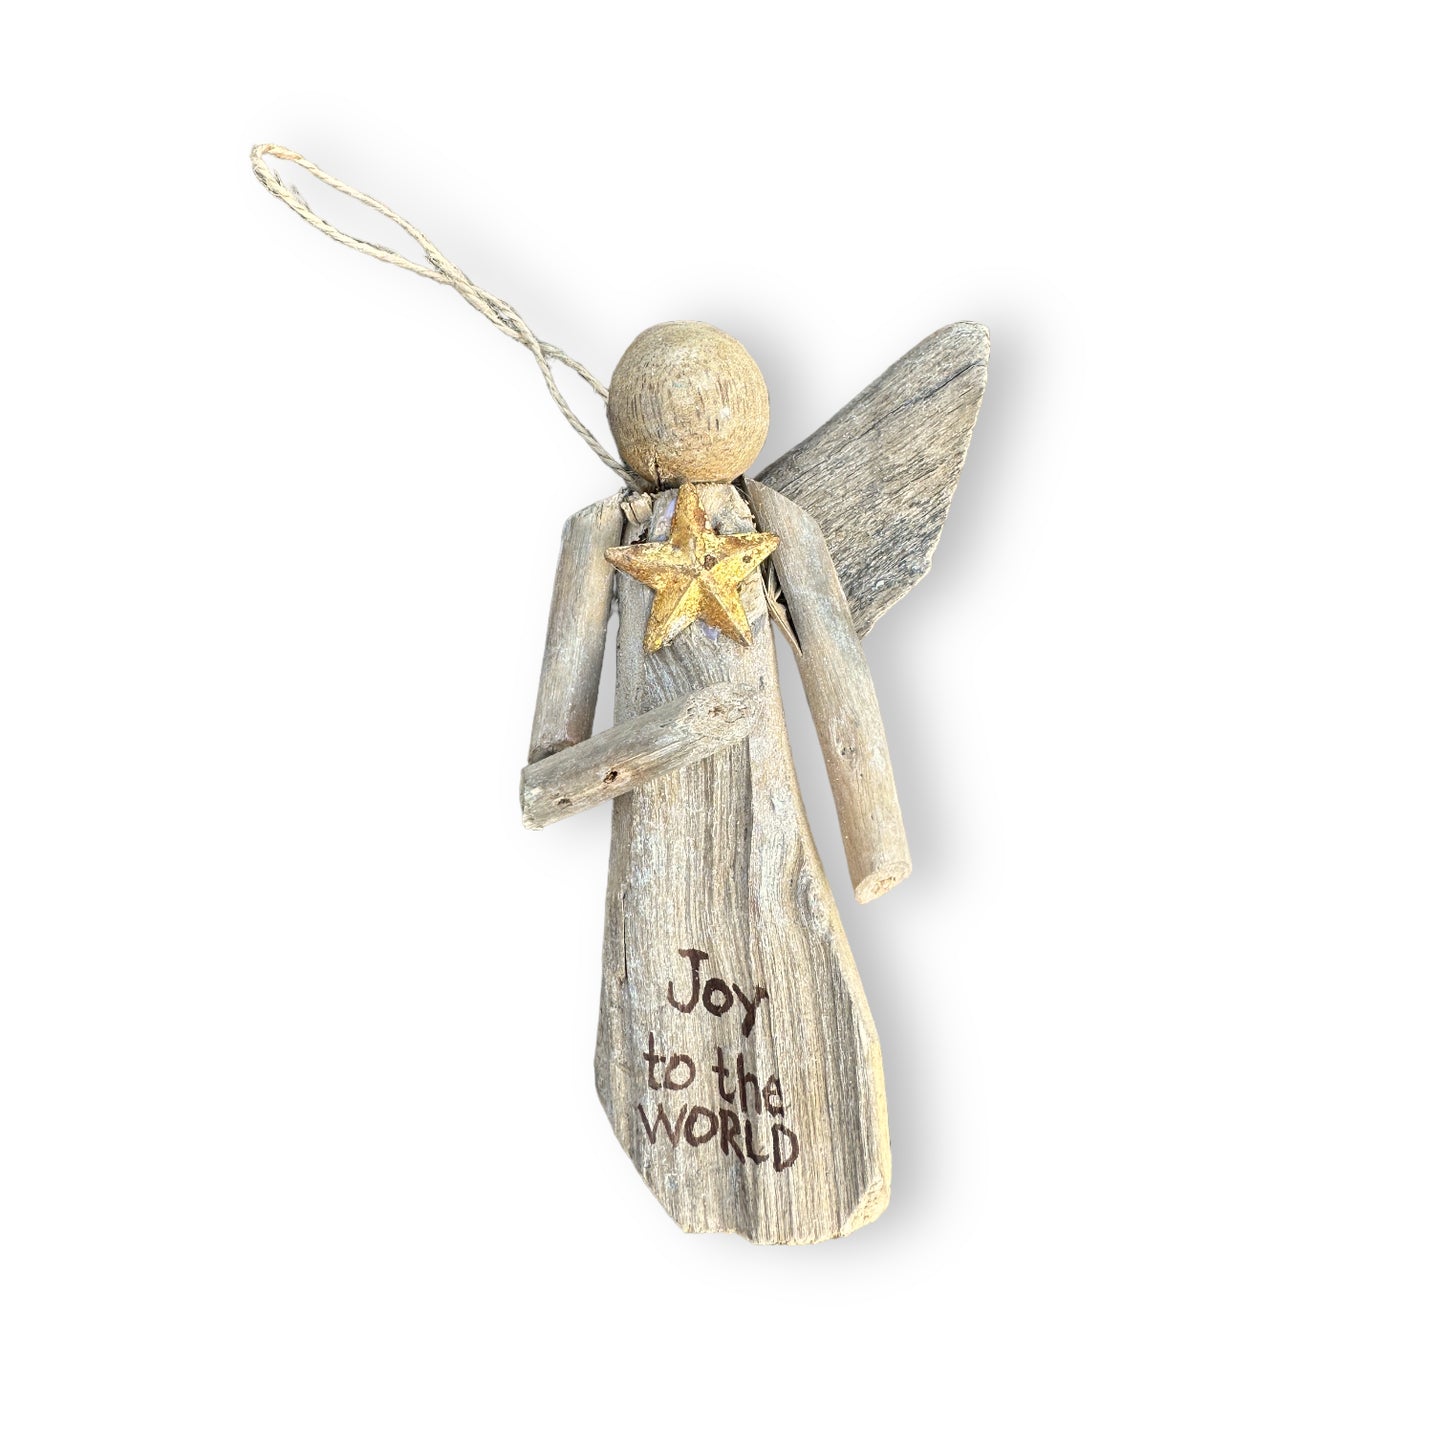 Joy To The World - Driftwood Angel Ornament - 5-in - Mellow Monkey